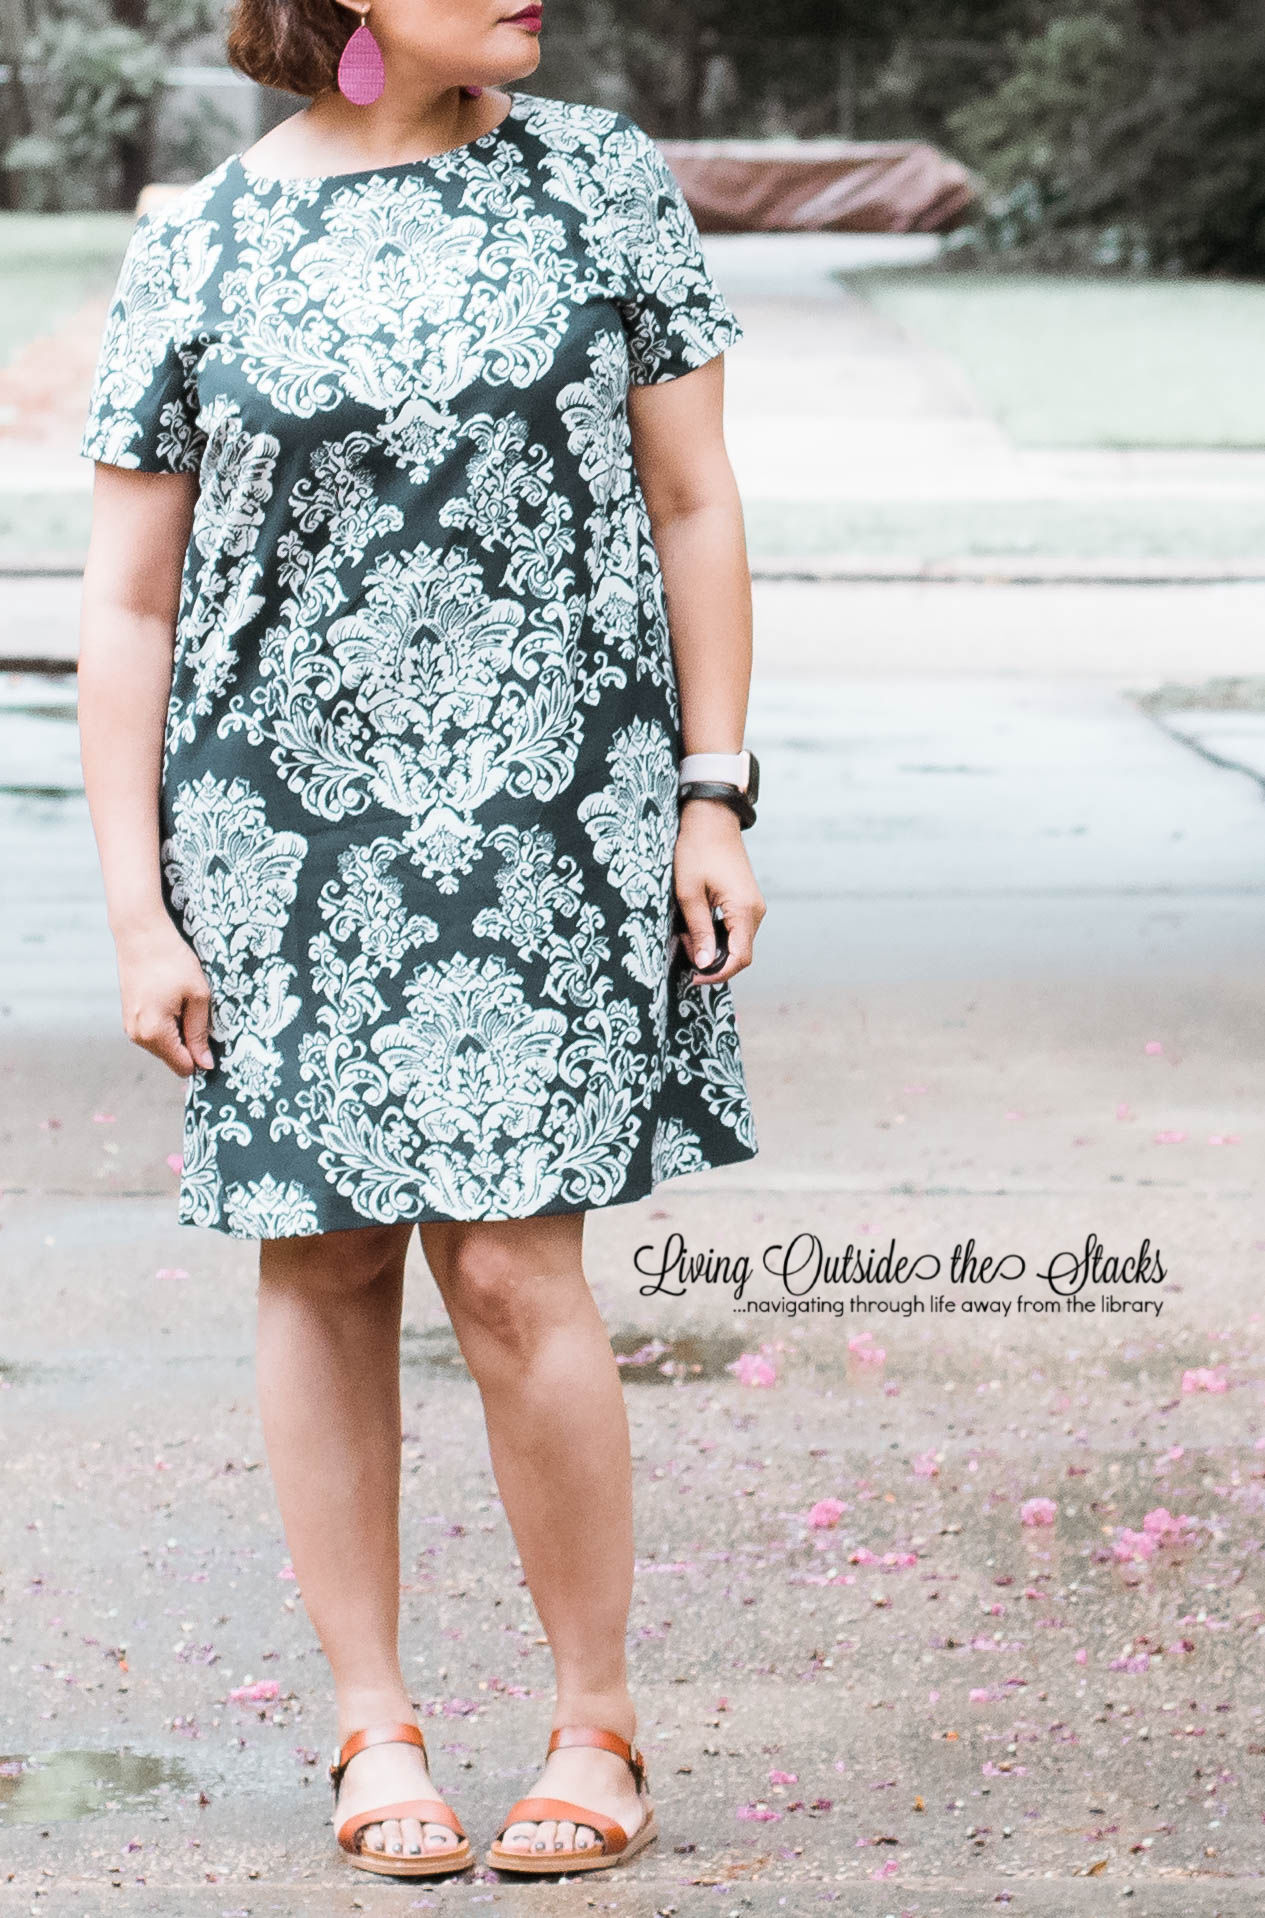 Daenel T {living outside the stacks} Blue Print Dress and Flat Sandals